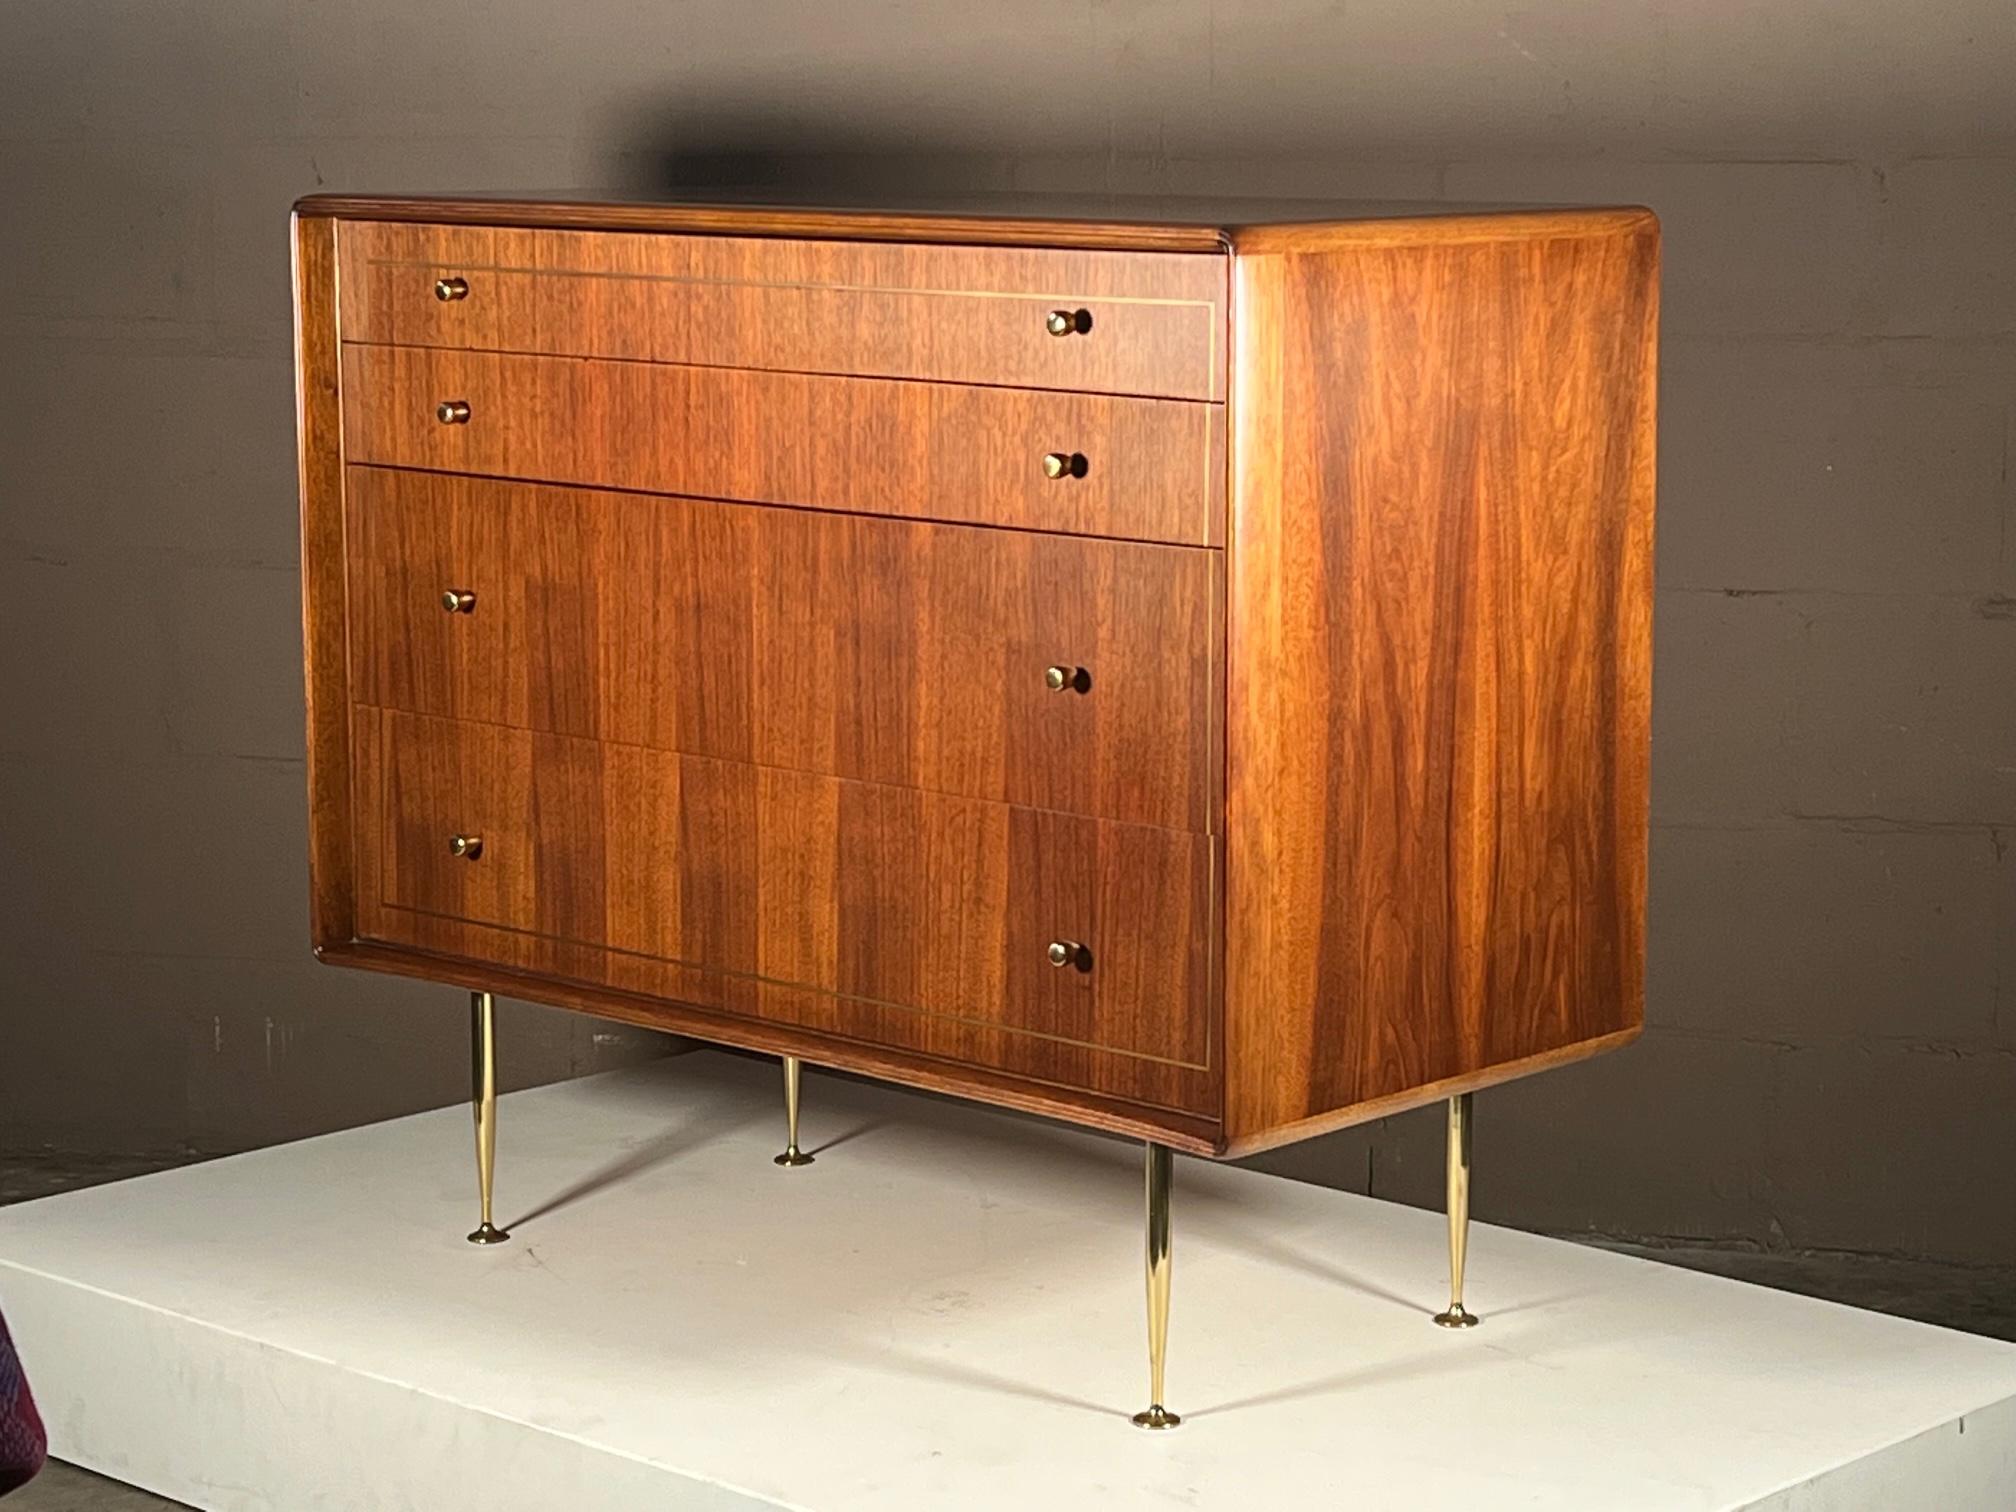 An elegant and refined chest of drawers by Erno Fabry. Made in Italy with solid brass, polished hardware and legs. Walnut construction with unusual curved front and picture frame design with brass inlay in the front drawers. Completely restored and